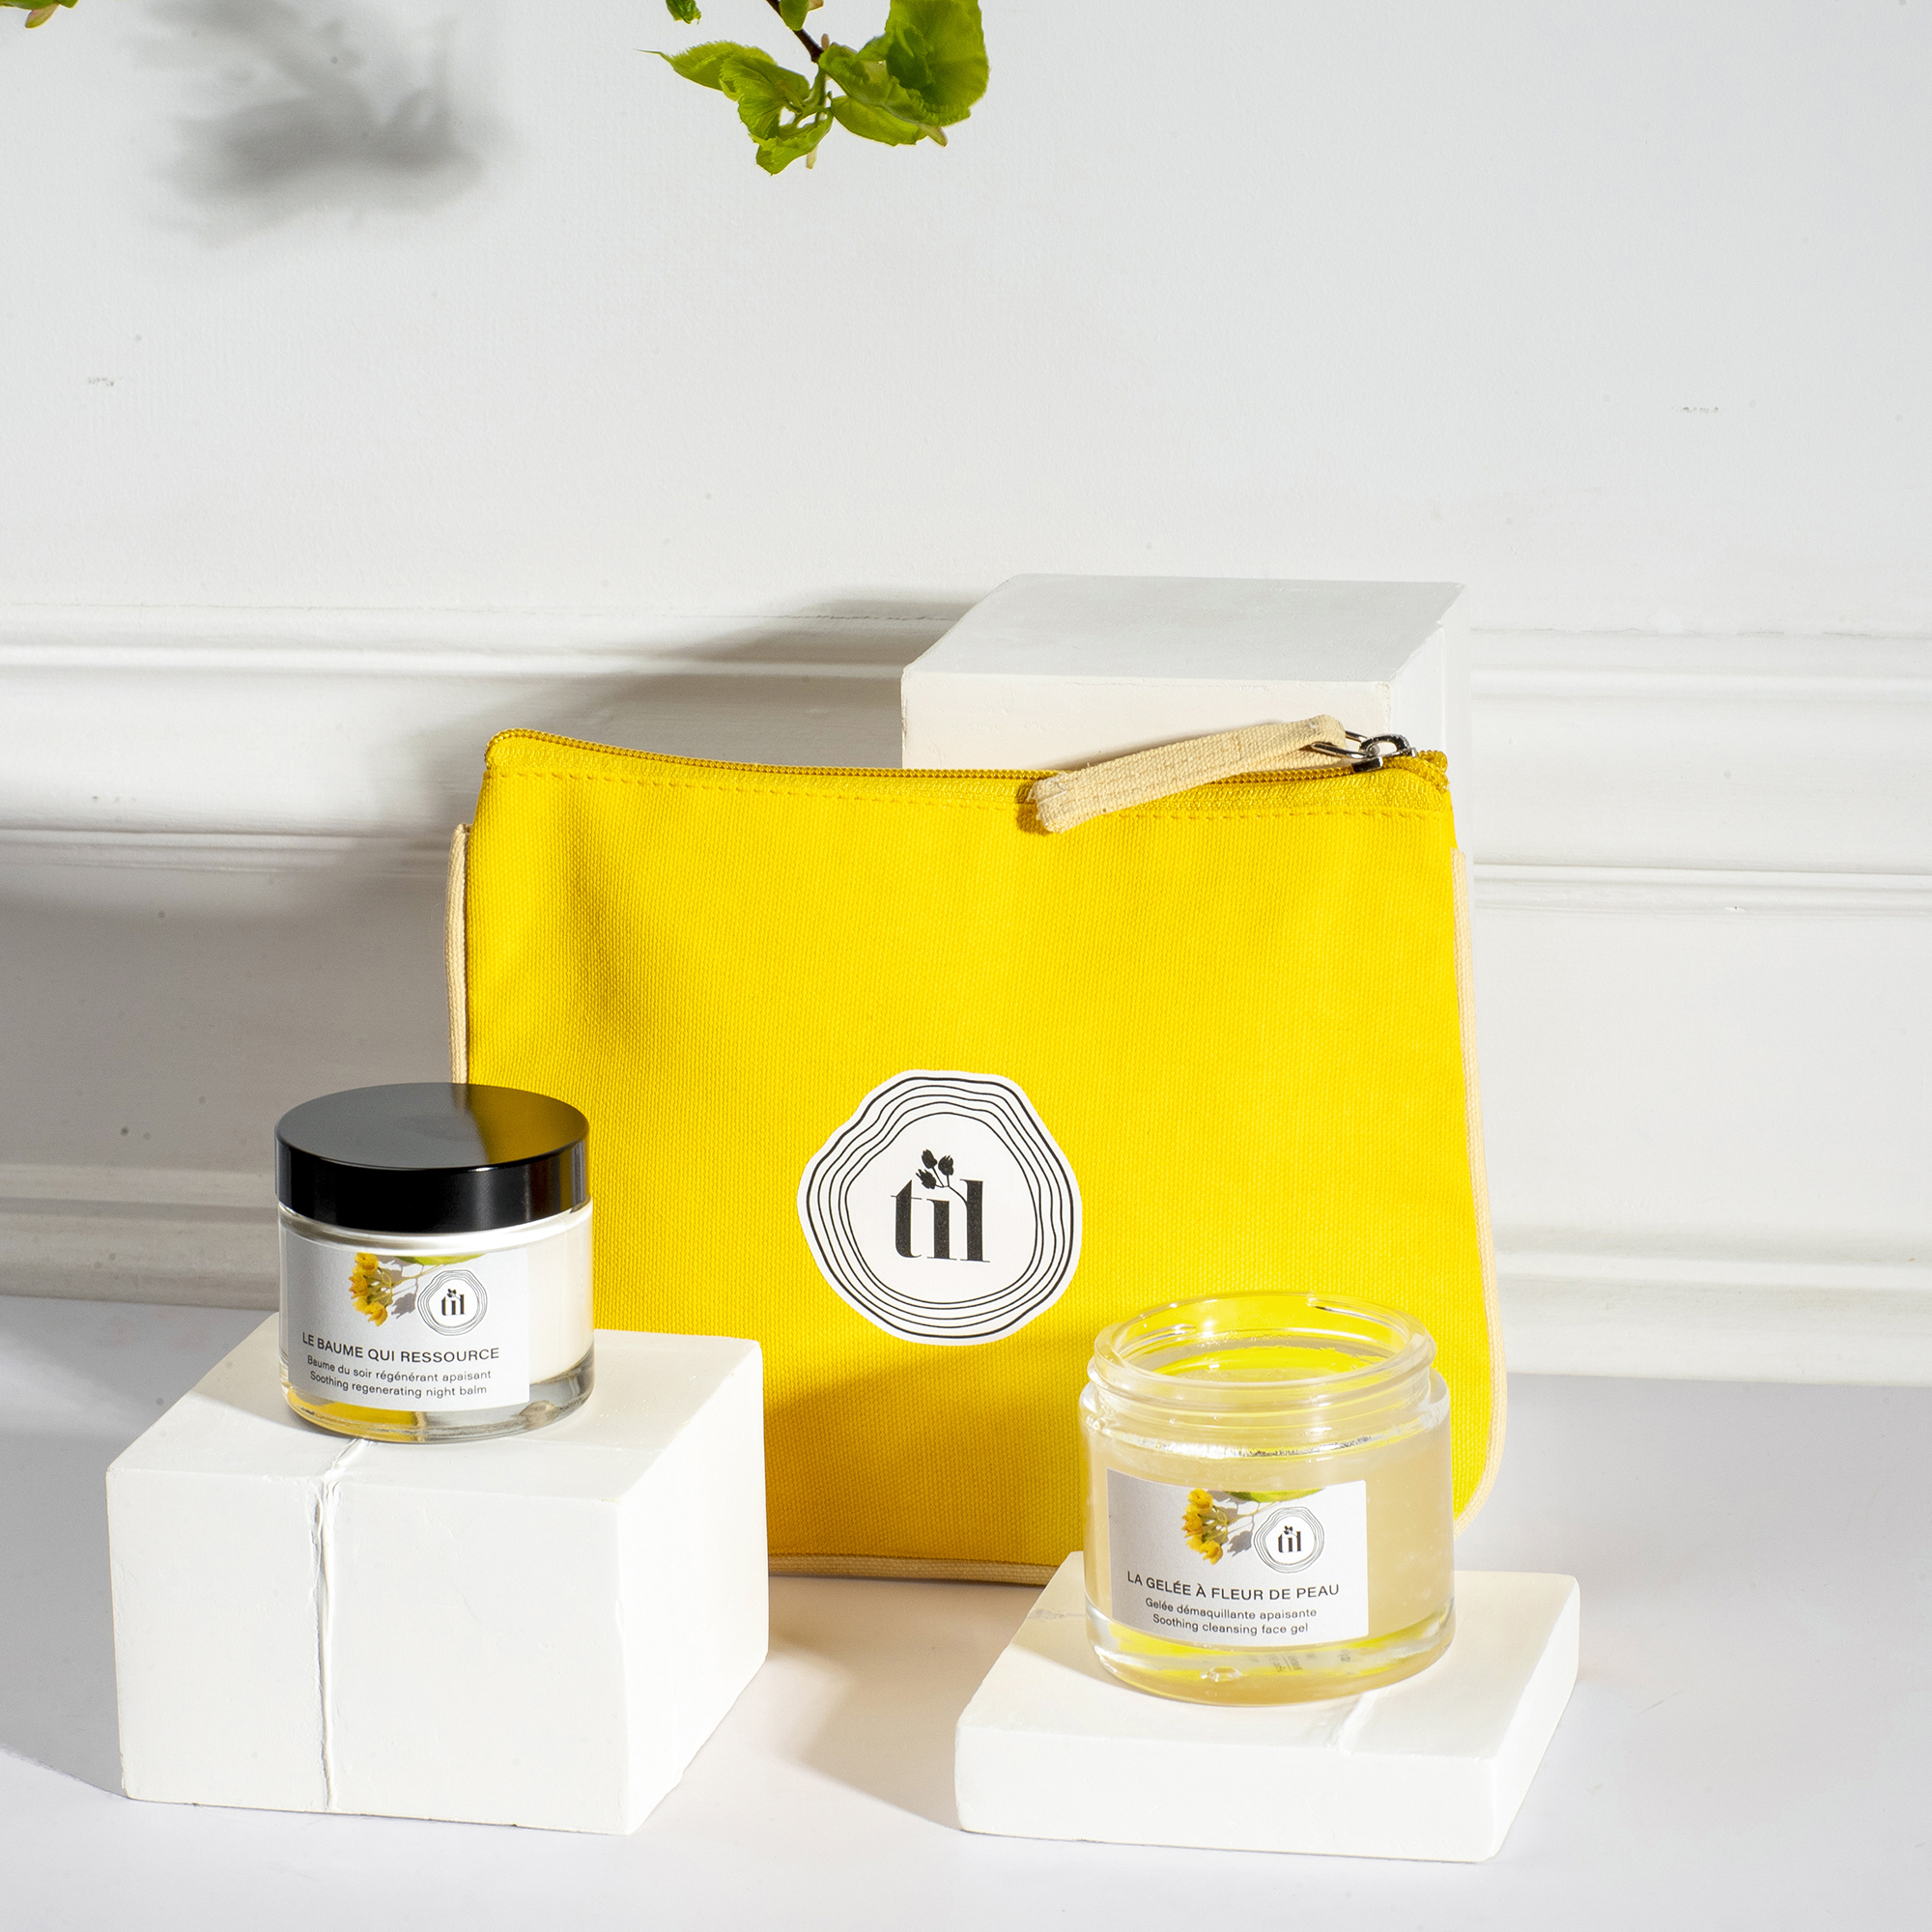 A Face Ritual by TiL, with a luminous cleansing and make-up removal gel, and an extremely soft and silky regenerating balm. All this in an absolutely sunny travel kit.